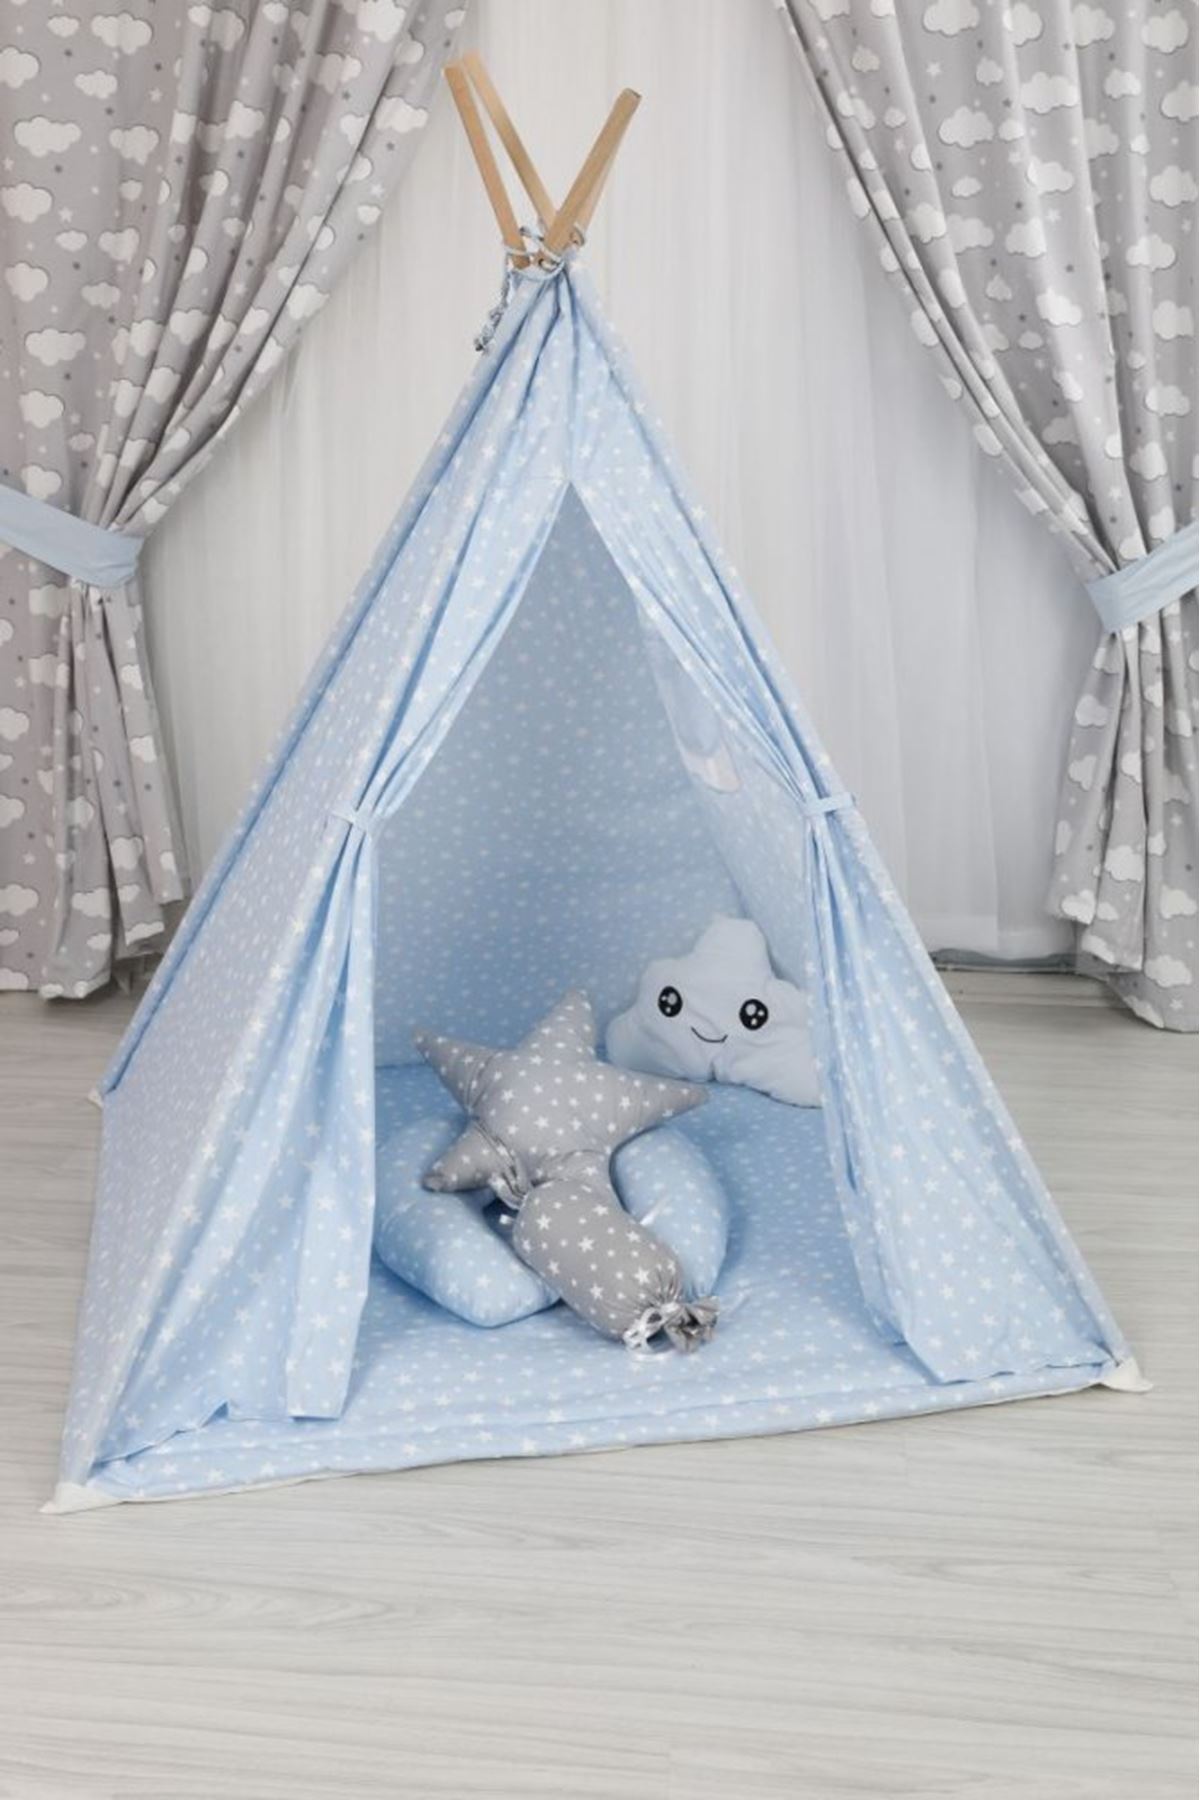 Play Tent "Blue Star"